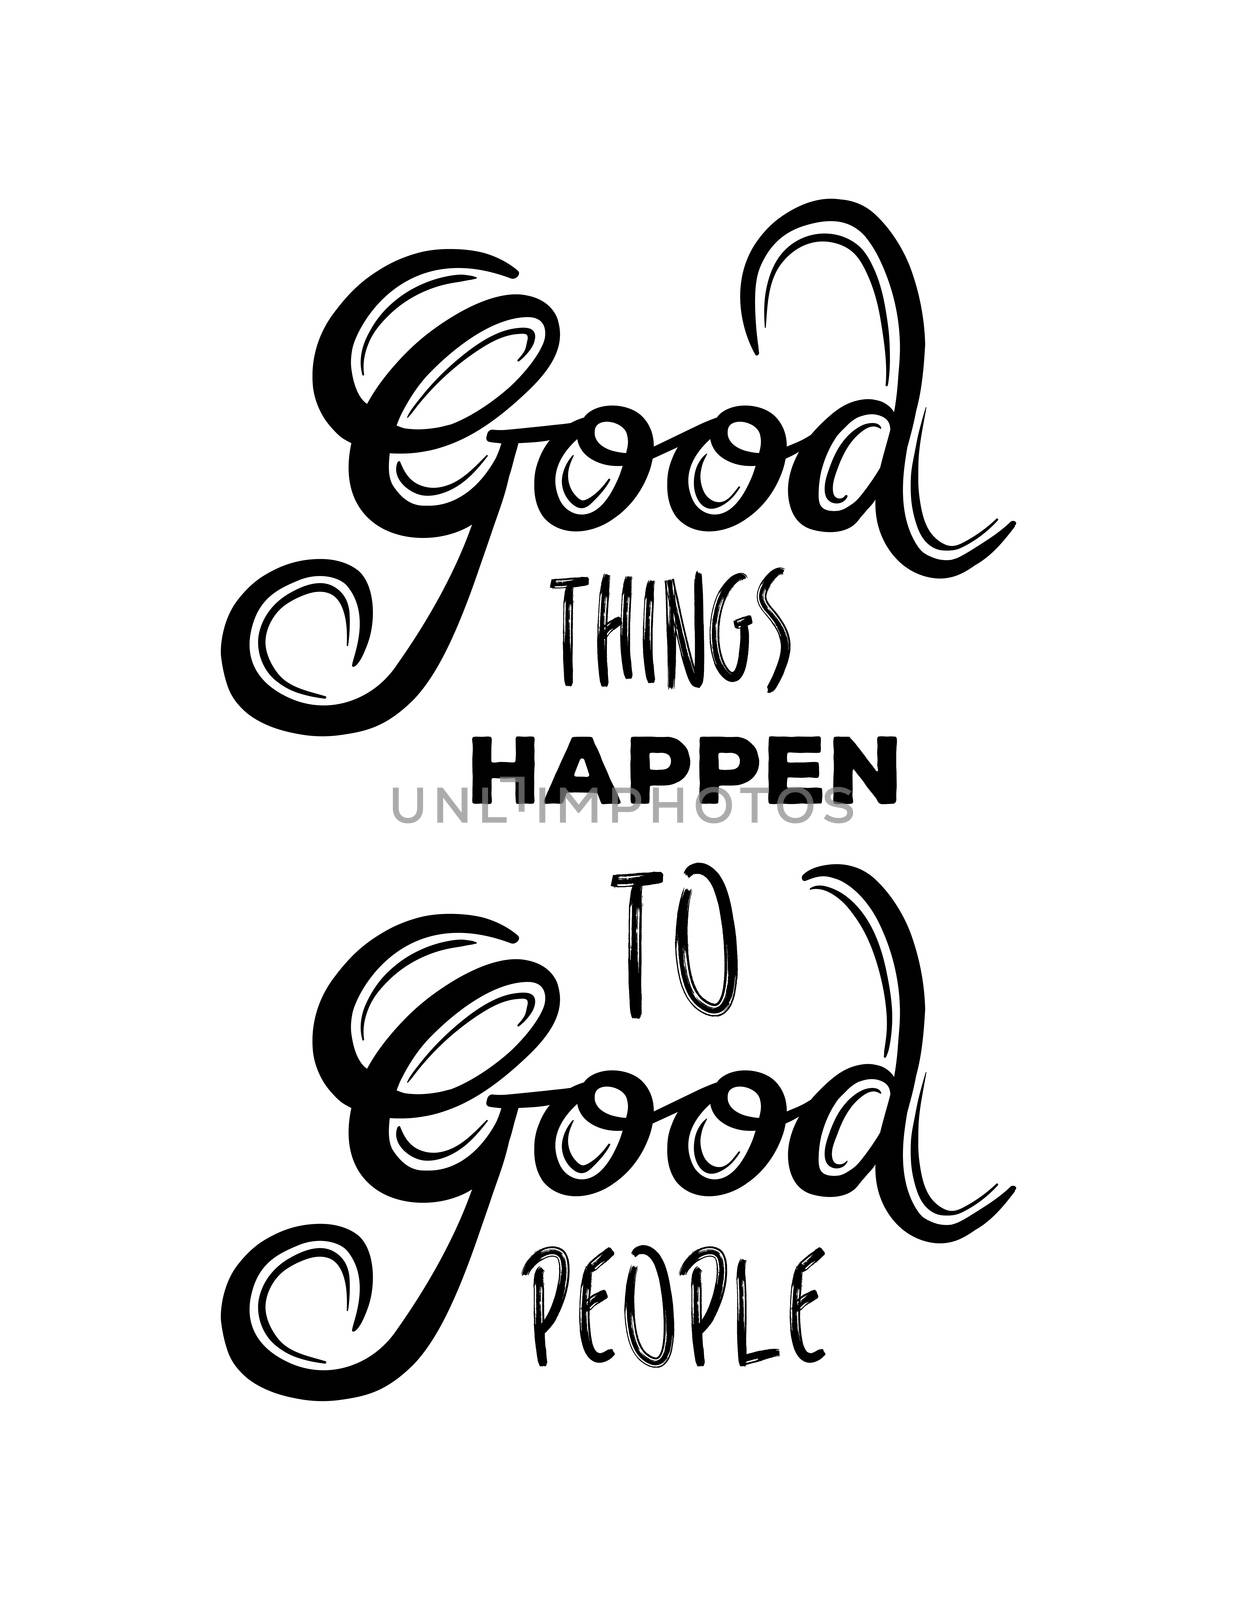 Digitally generated Good things happen to good people vector